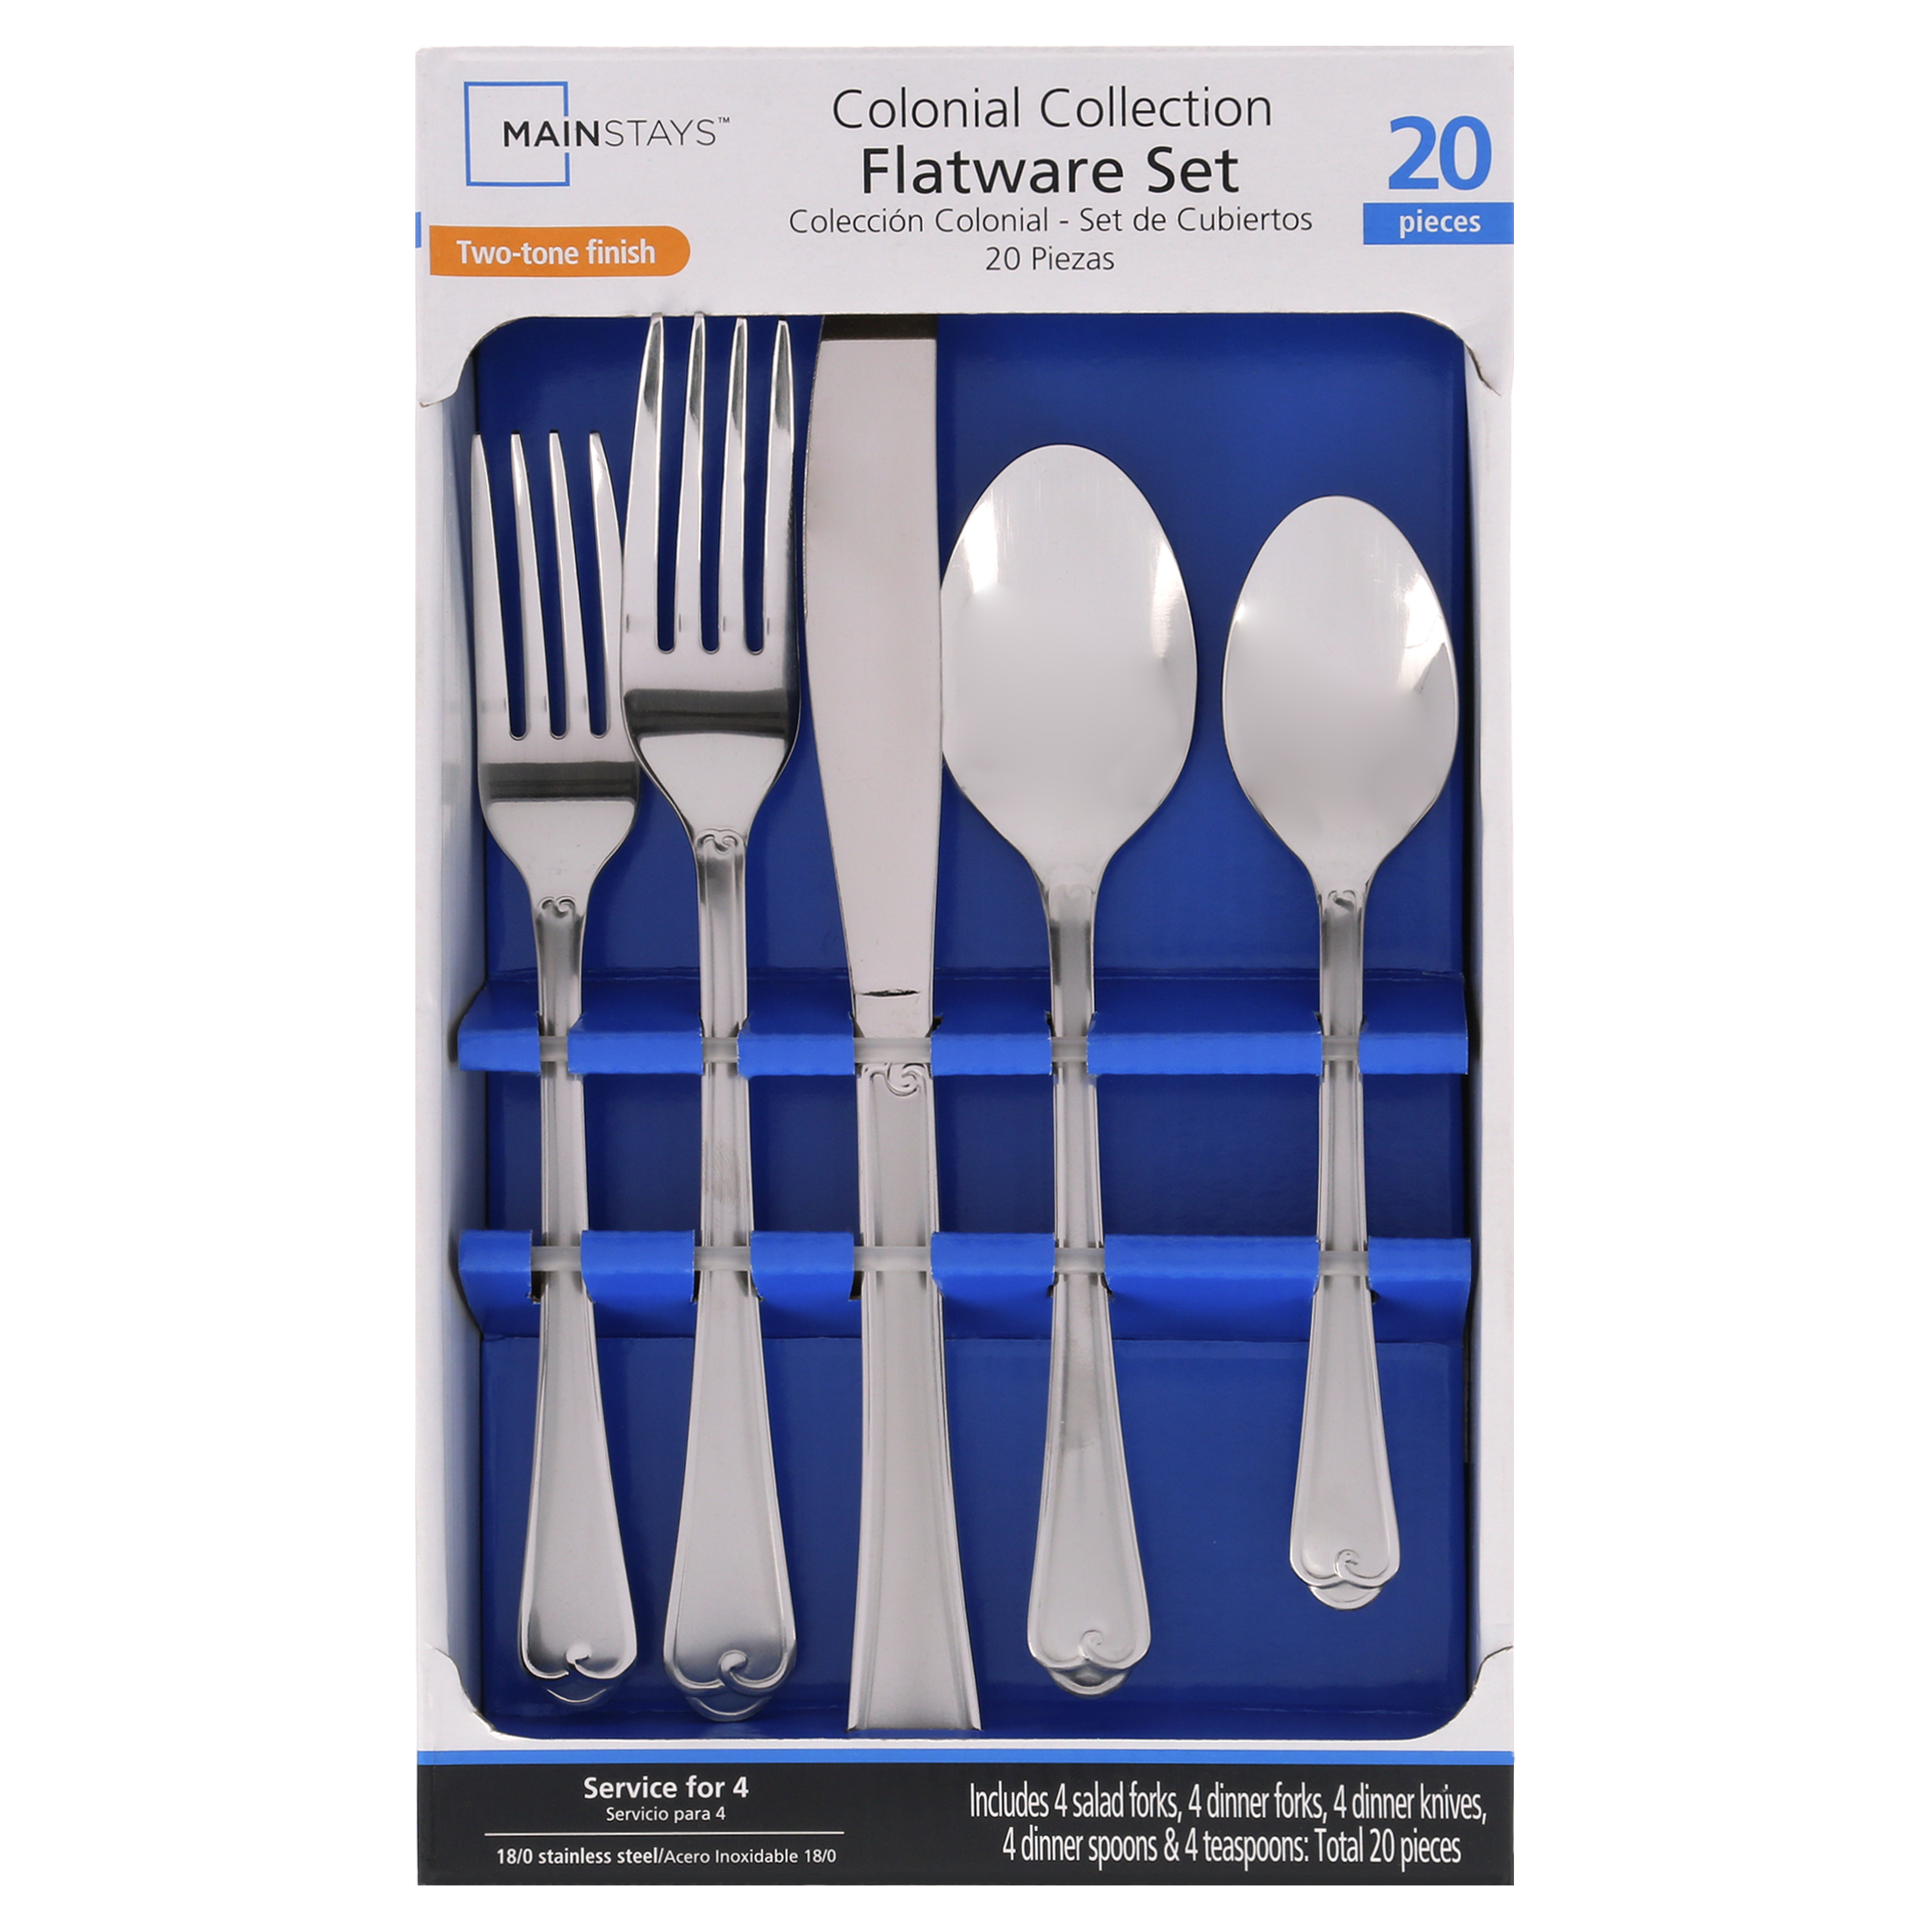 Mainstays Colonial 20 Piece Stainless Steel Flatware Set - image 5 of 9